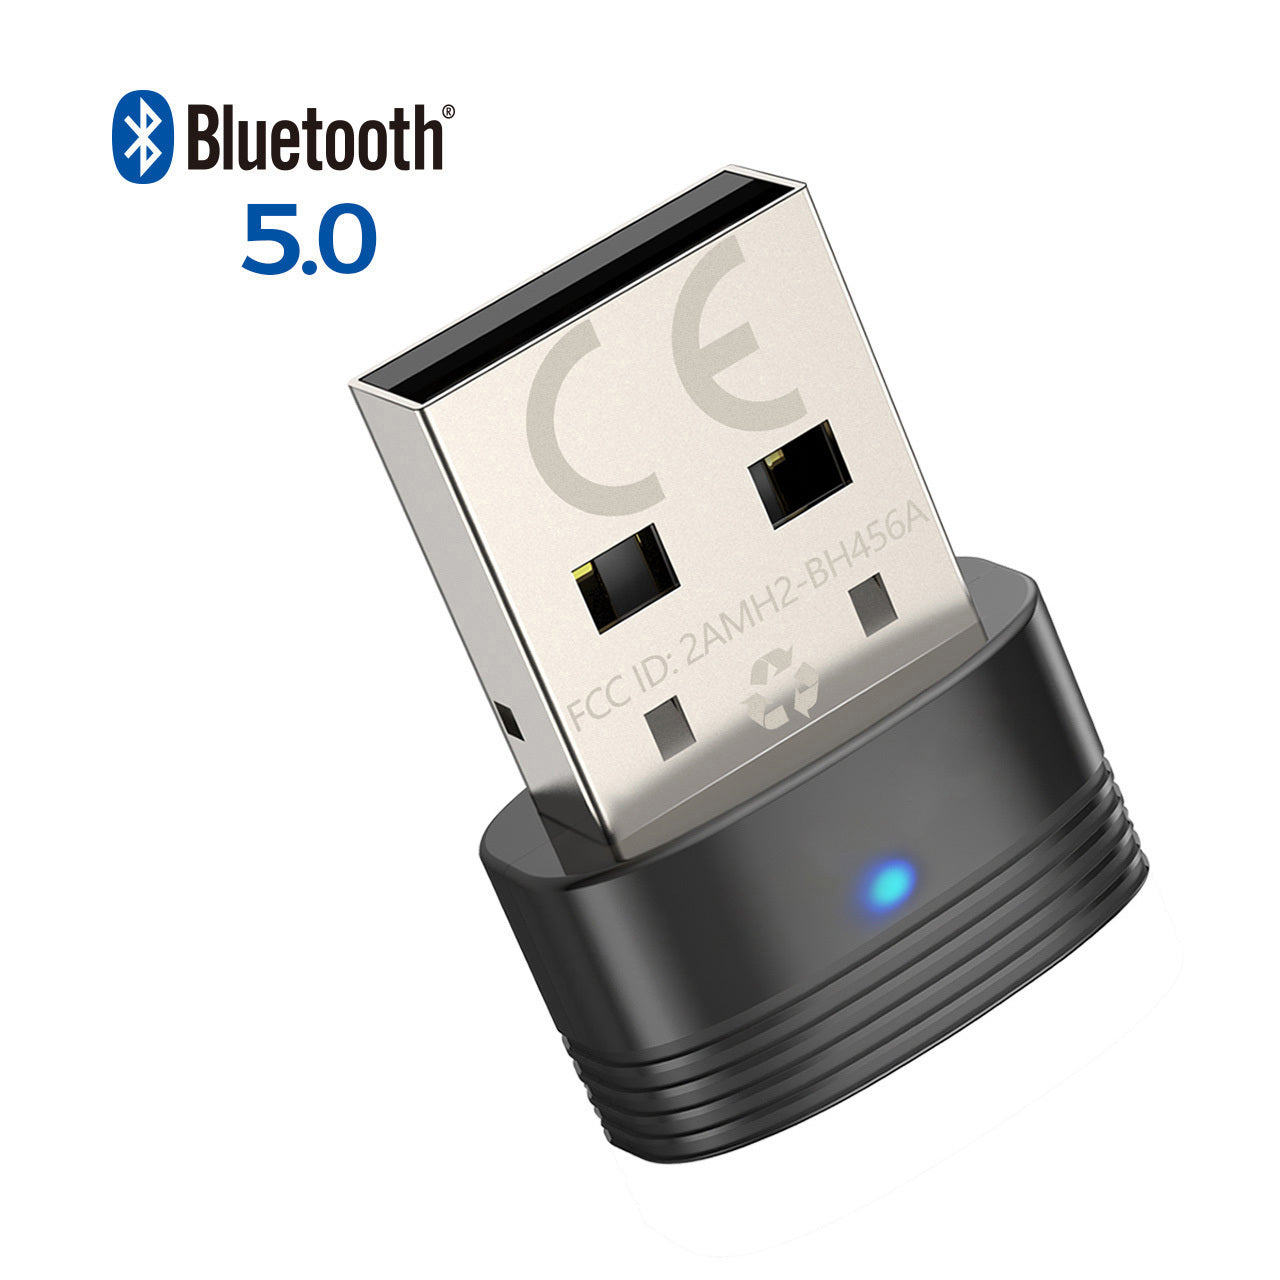 Bluetooth Adapters for PC – Micro Bluetooth 5.0 USB Adapter with